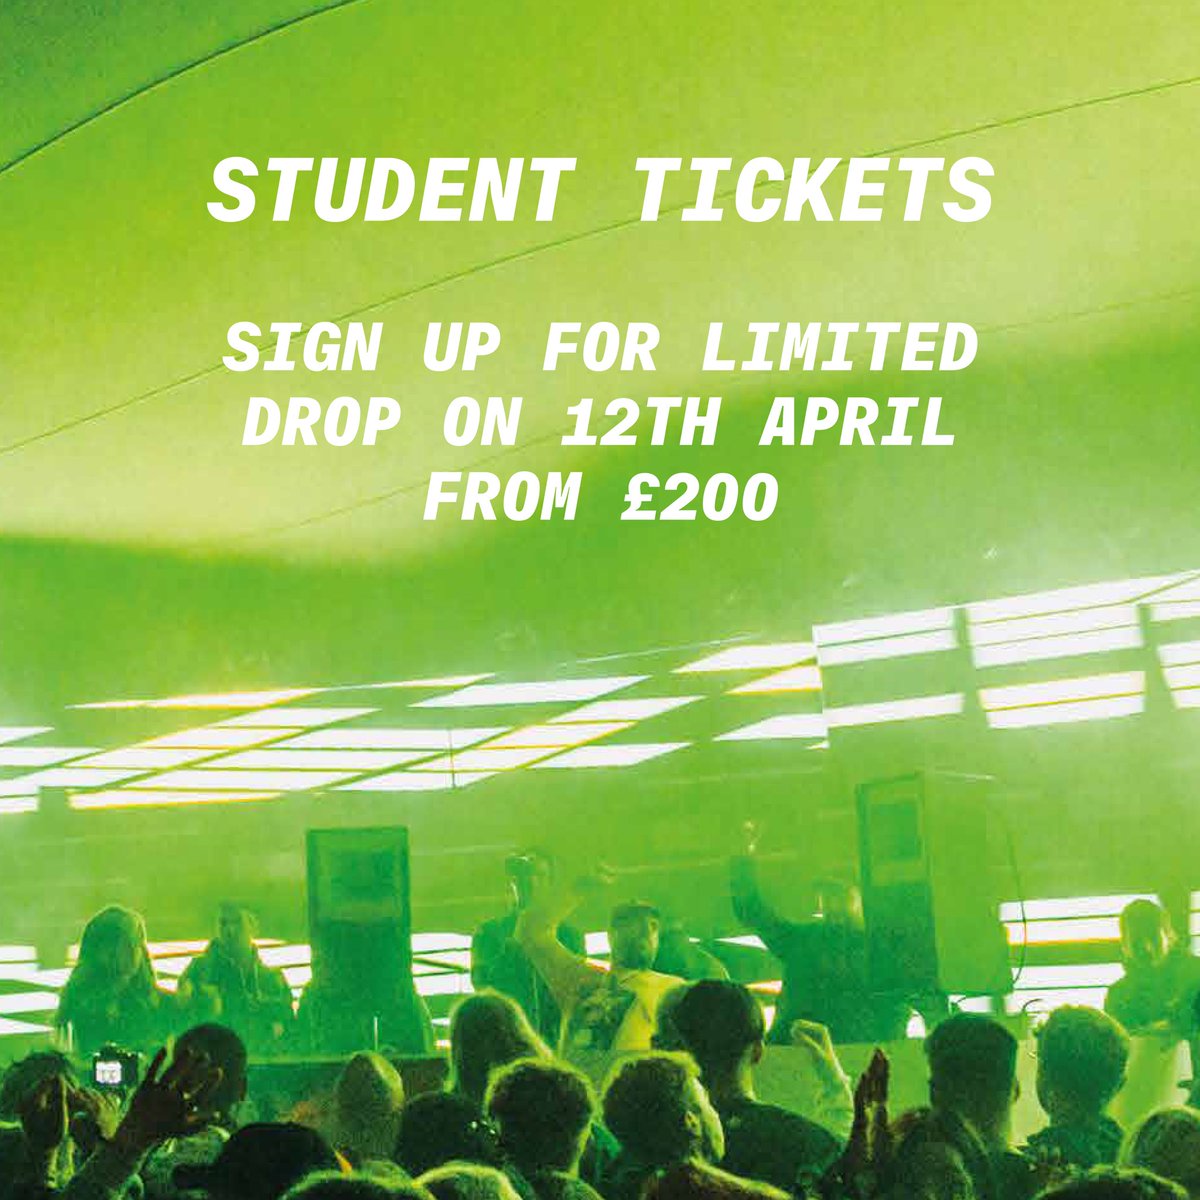 STUDENTS! ✍️ We've got a very limited amount of student tickets dropping for Gottwood this year. Starting from £200 and increasing over a handful of tiers. Sign up below for access. Tickets go live on the 12th April. 🔗 gottwood.co.uk/student-landin…